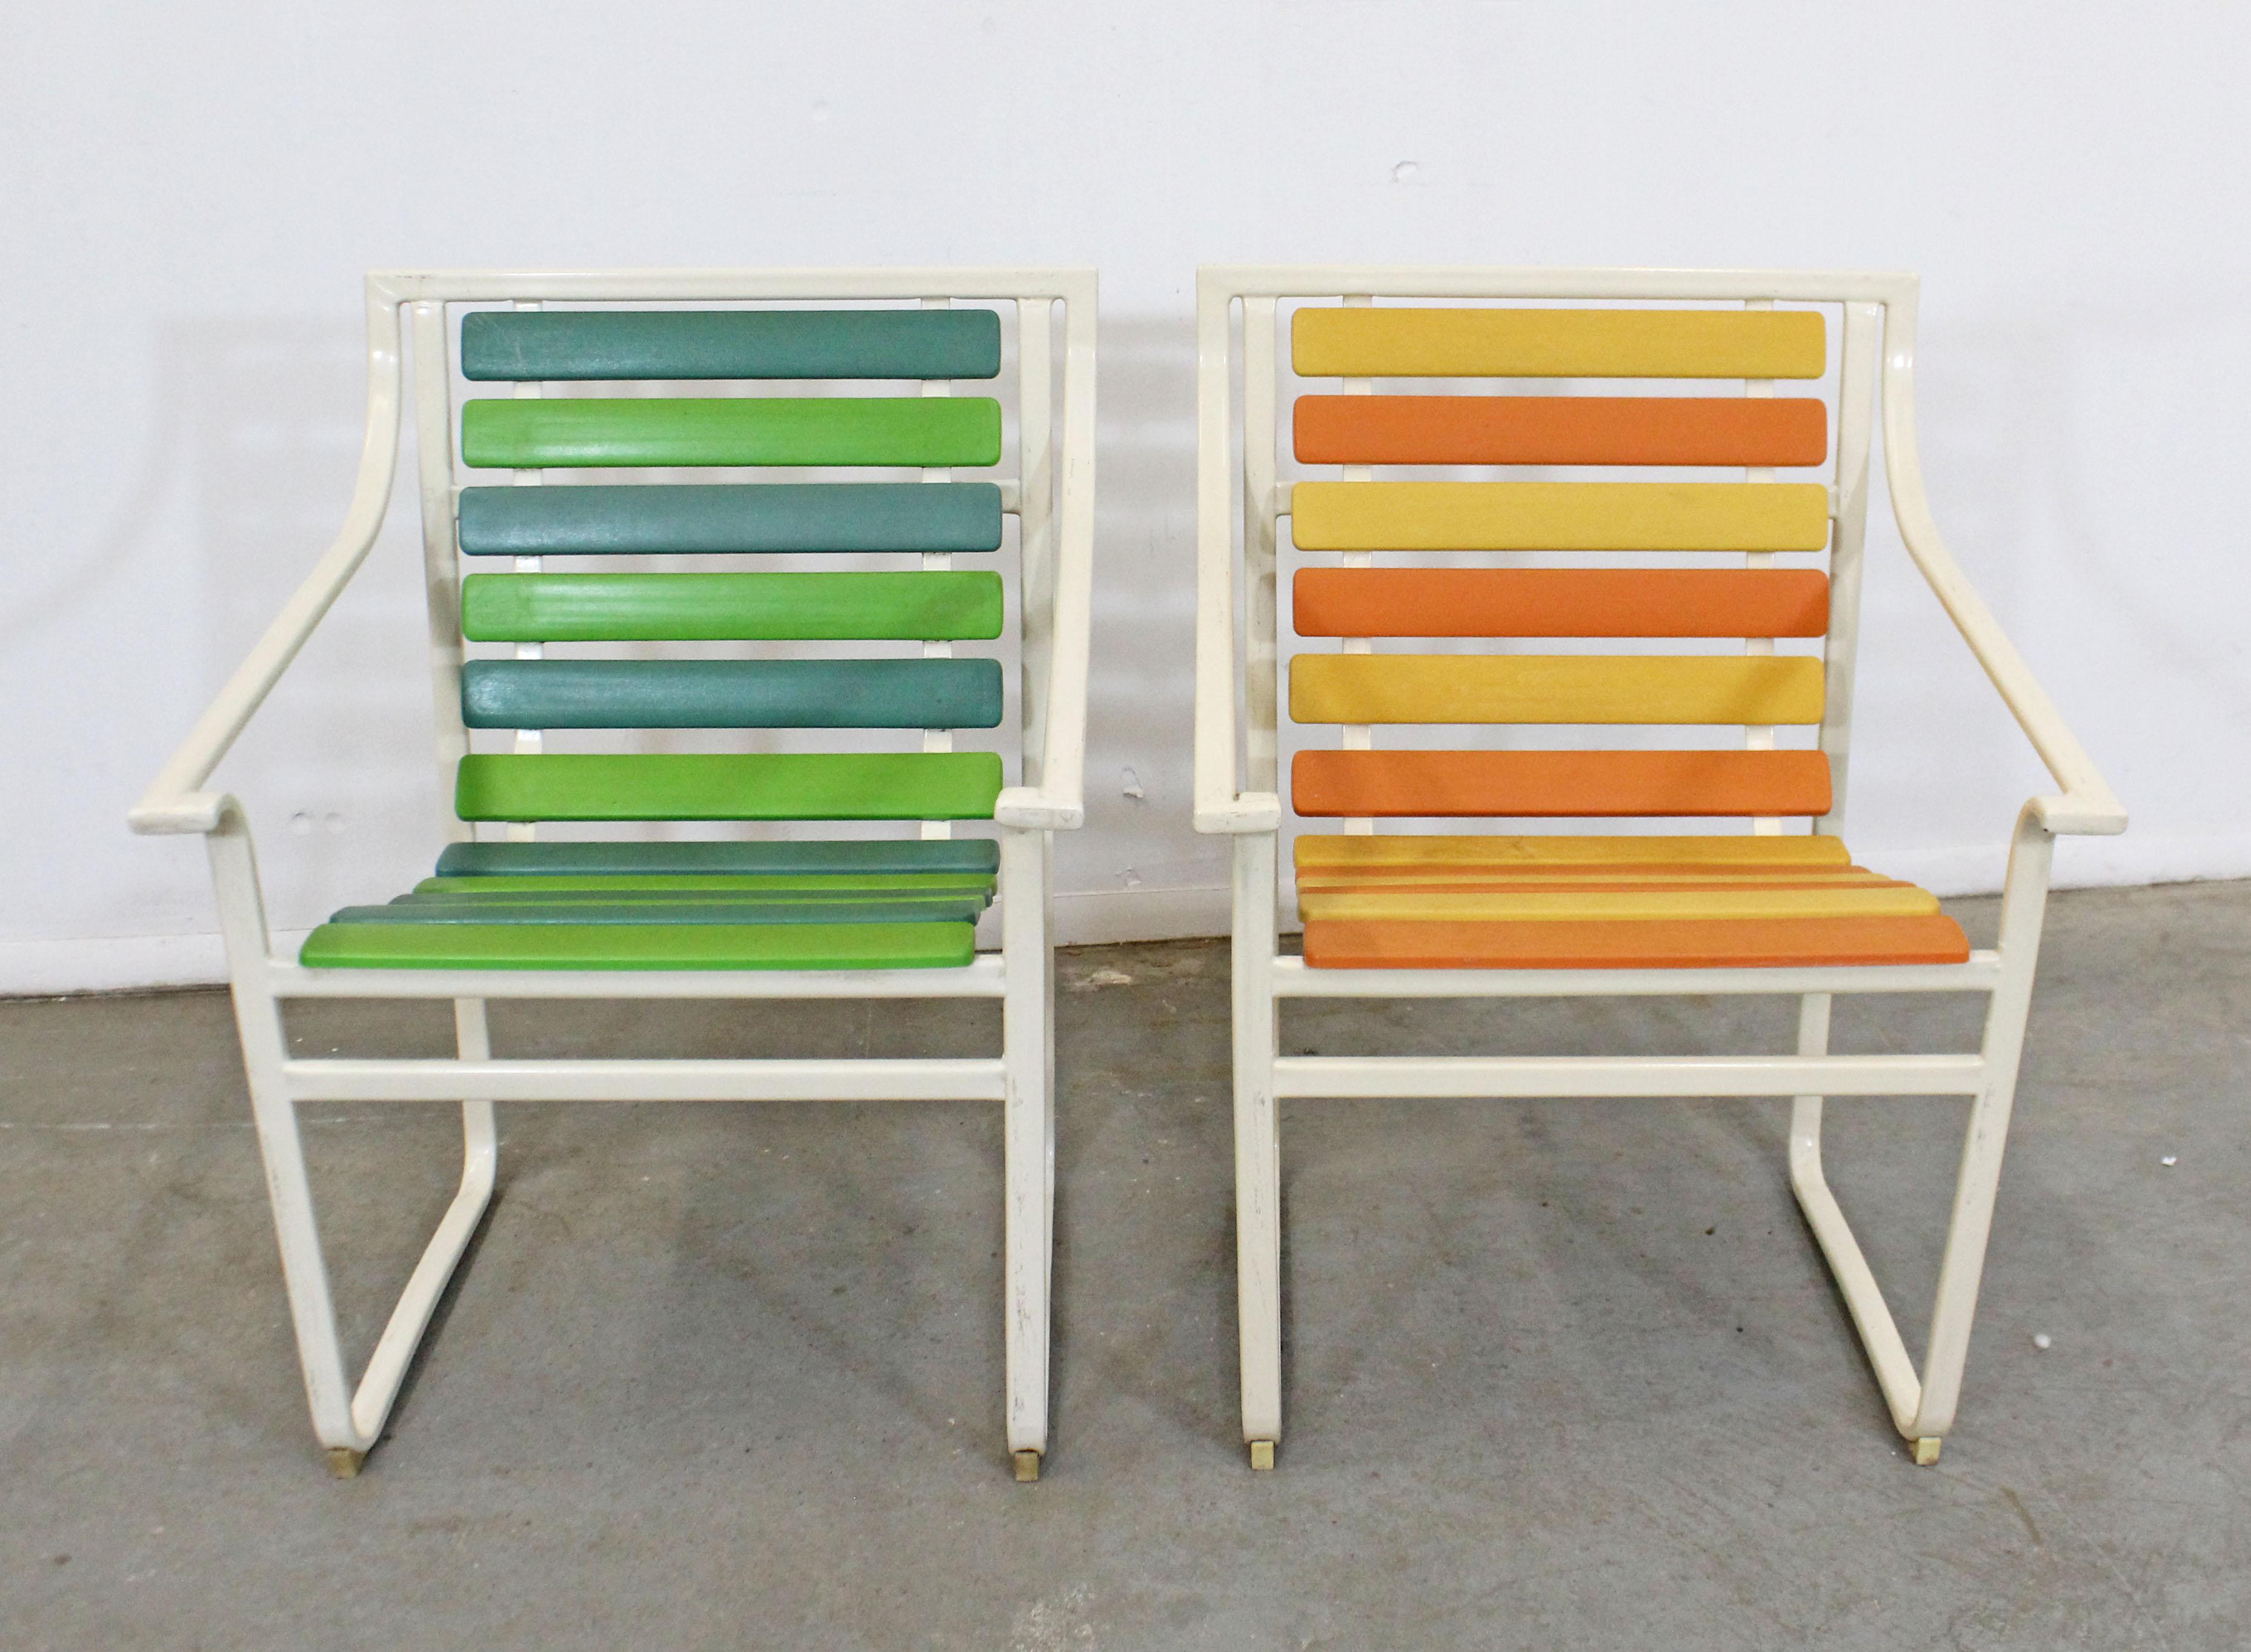 This is a pair of vintage midcentury outdoor armchairs with flat tubular steel frames and multicolored plastic slats. They were made by Samsonite, circa 1960s. In overall decent, structurally sound condition, has visible surface wear including